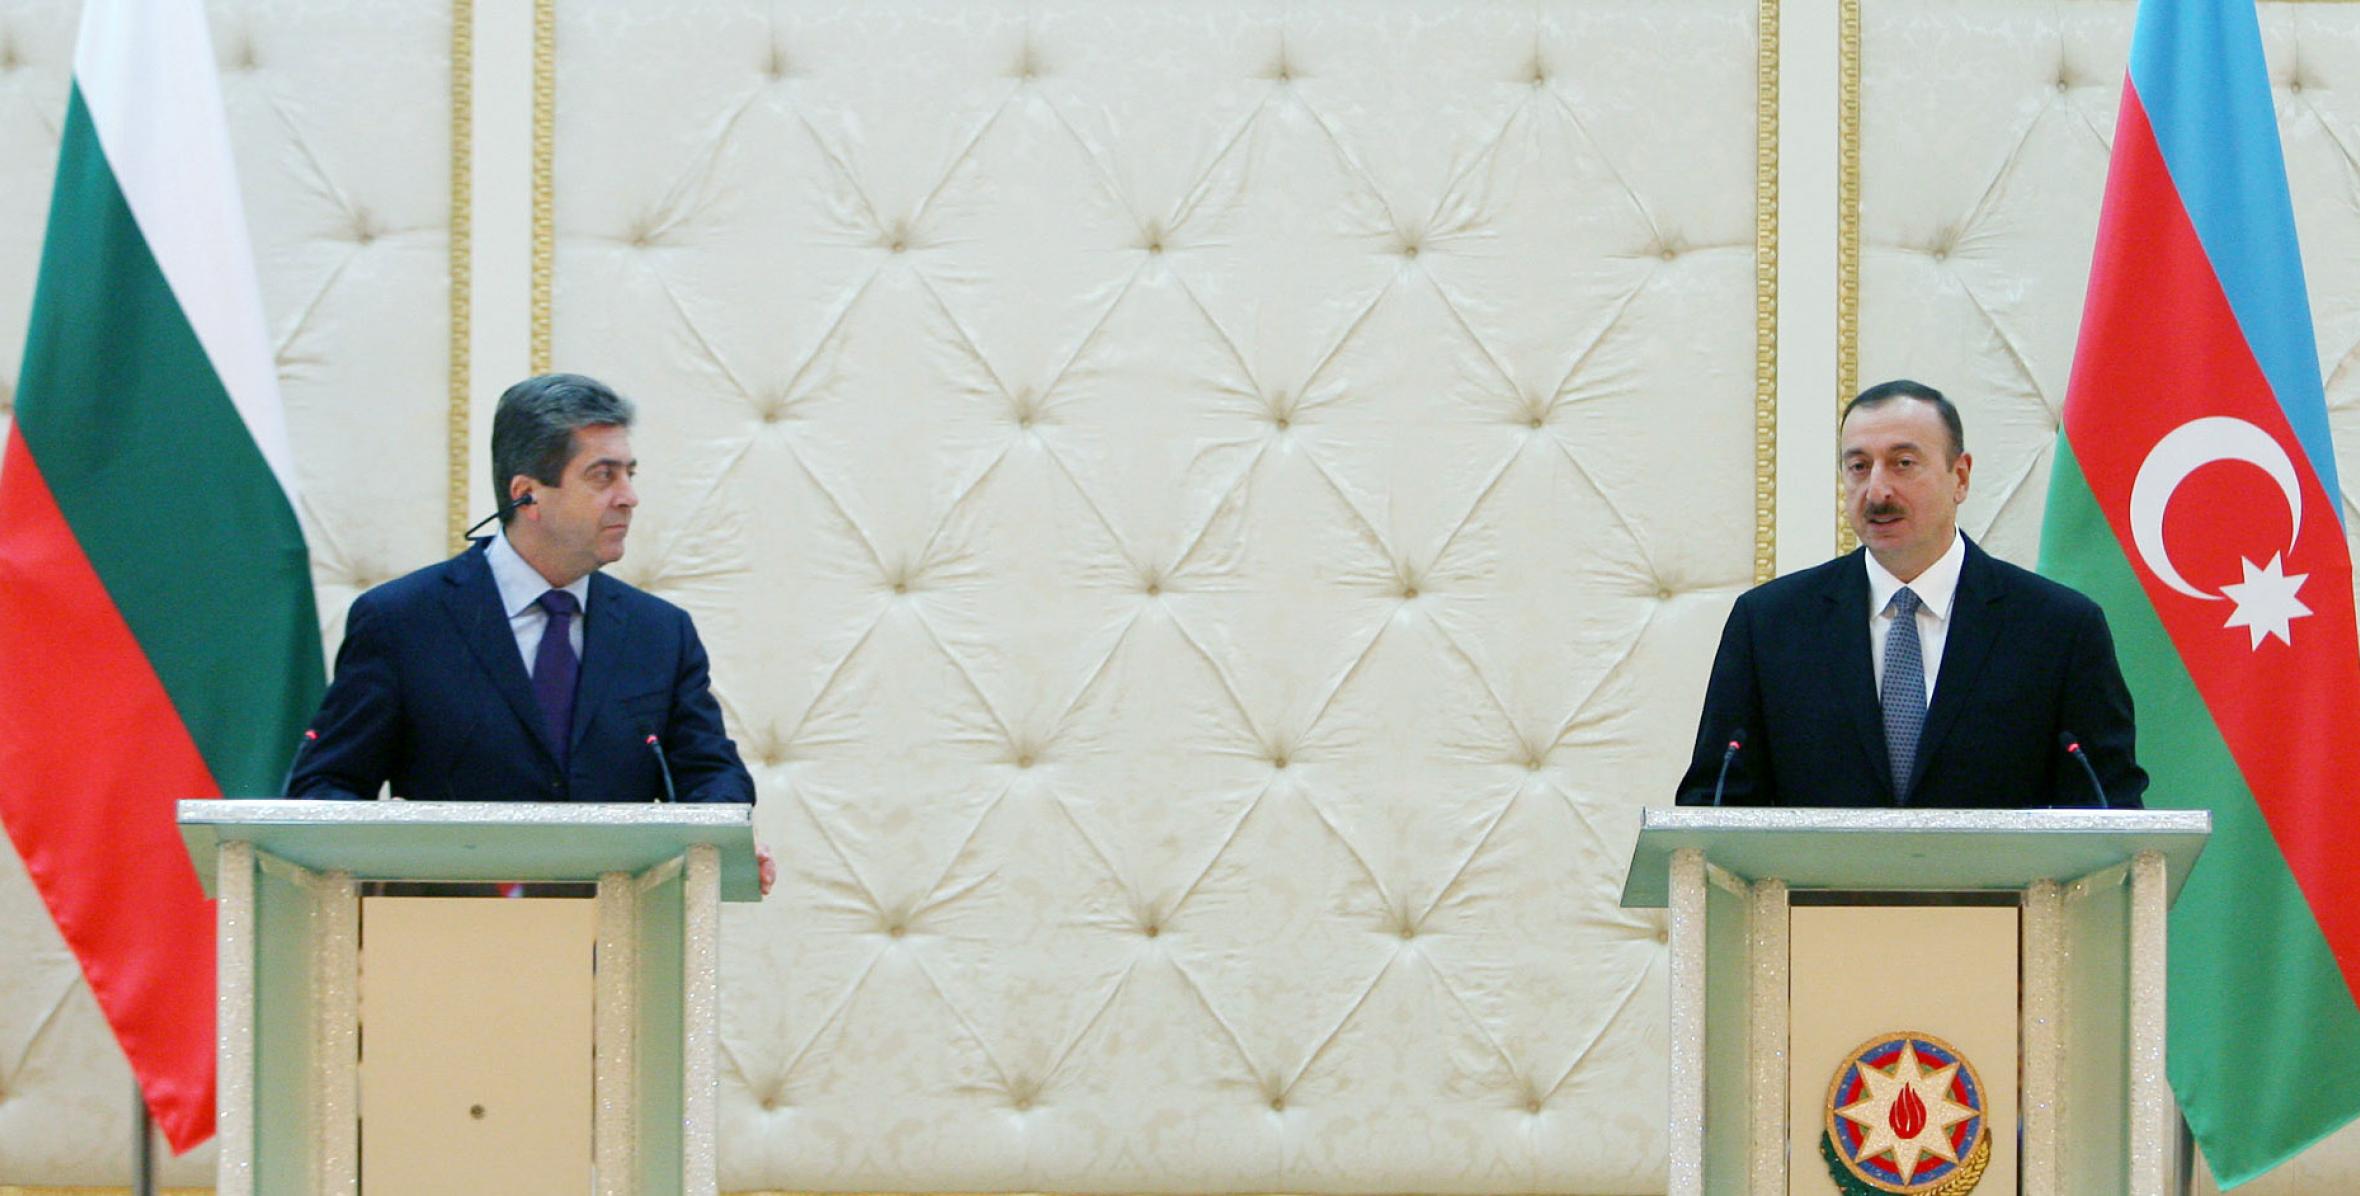 Presidents of Azerbaijan and Bulgaria made statements for the press